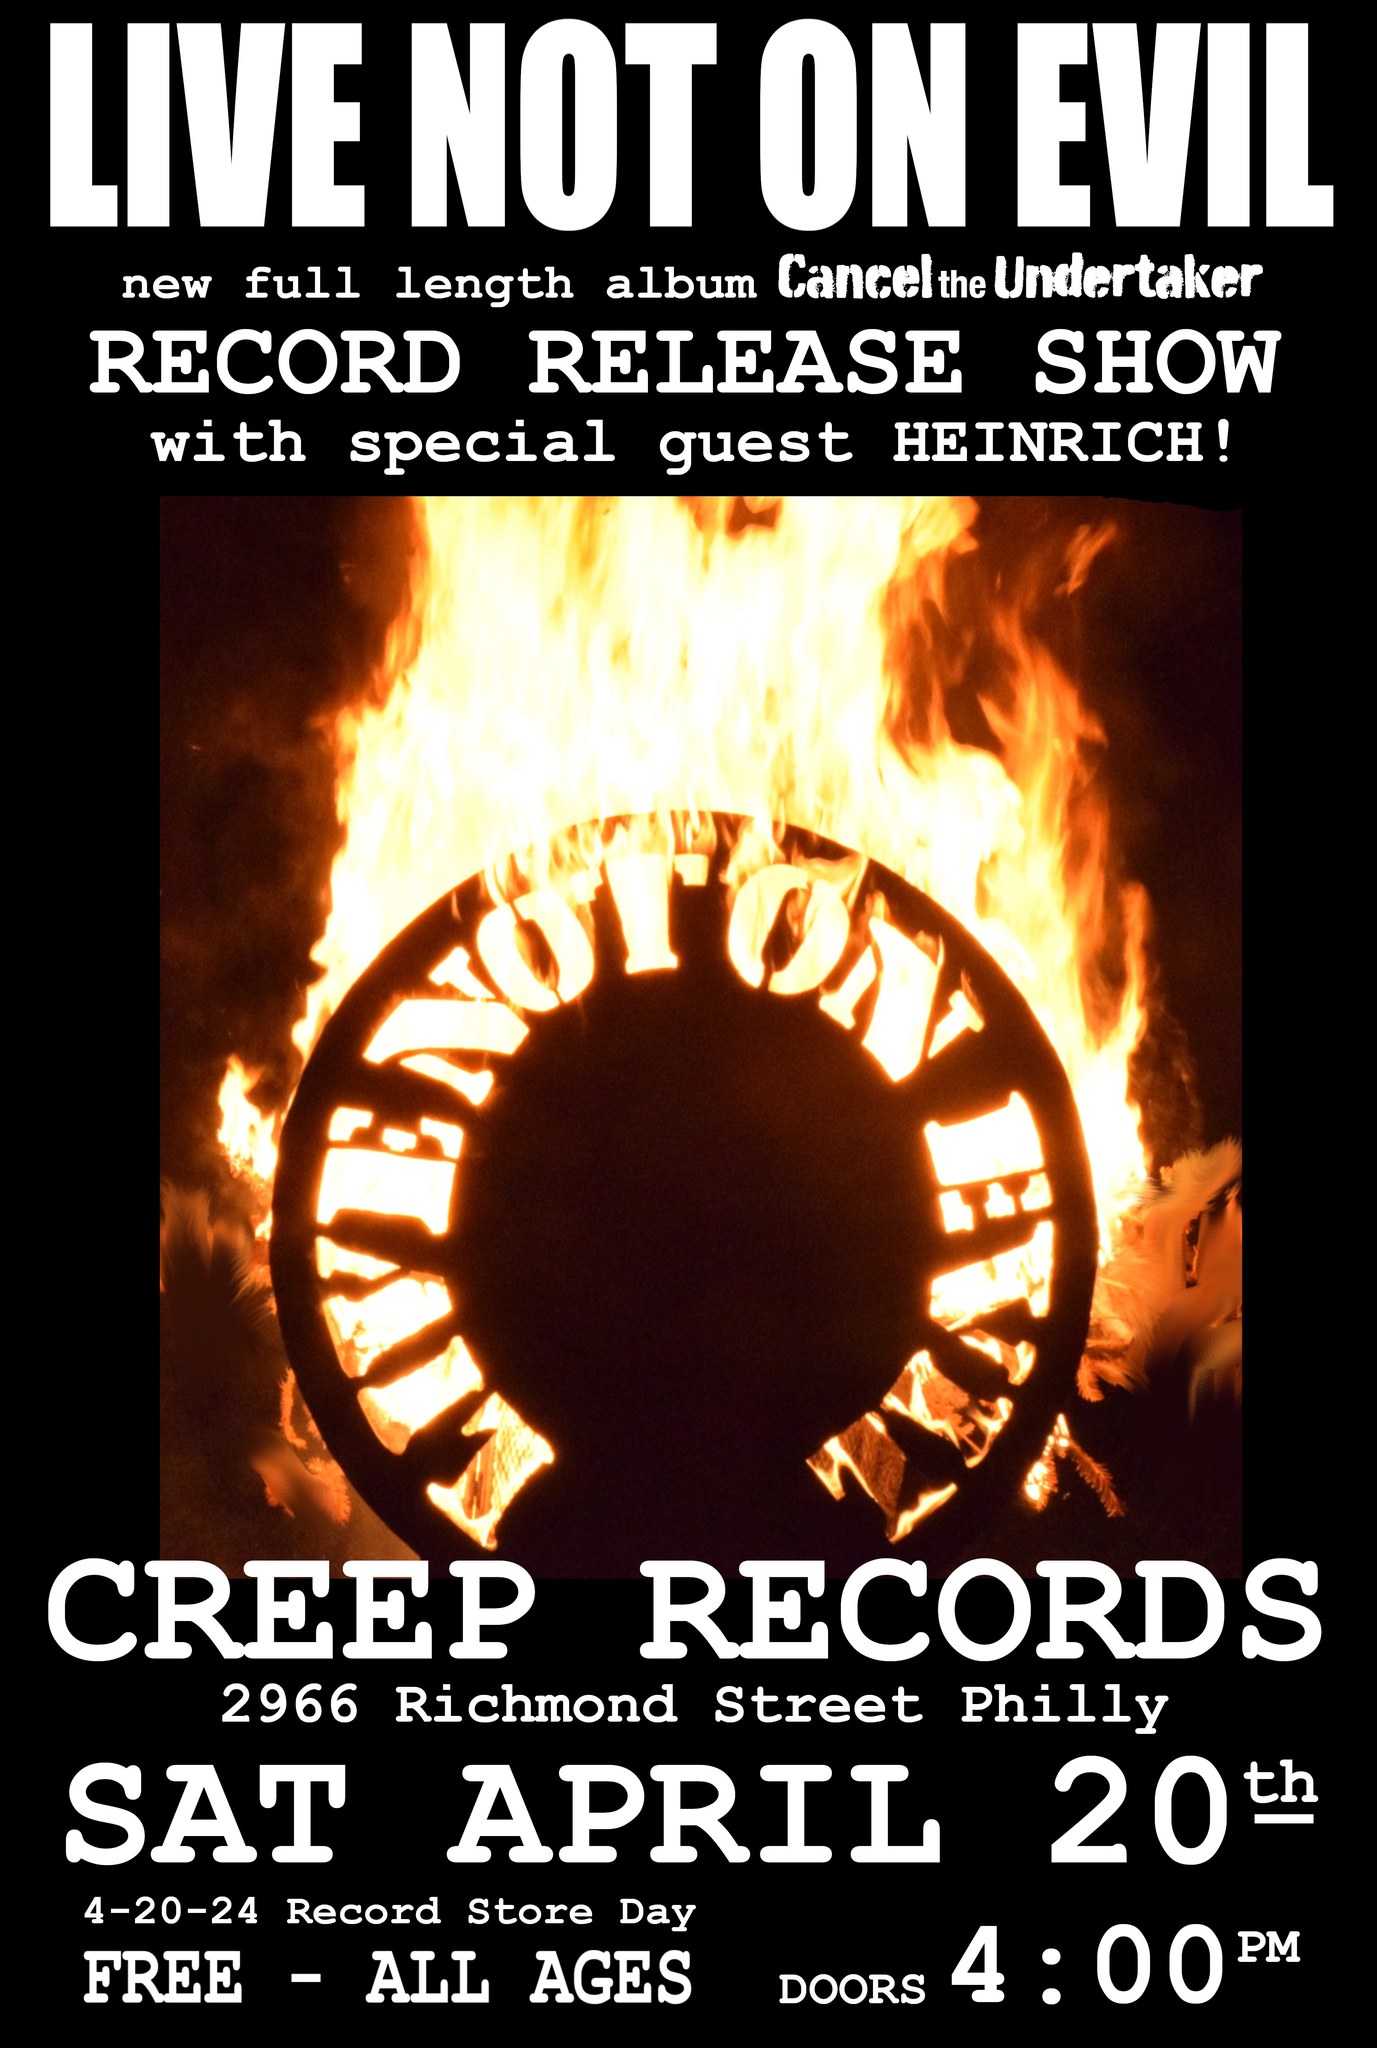 Live Not On Evil Record Release Show